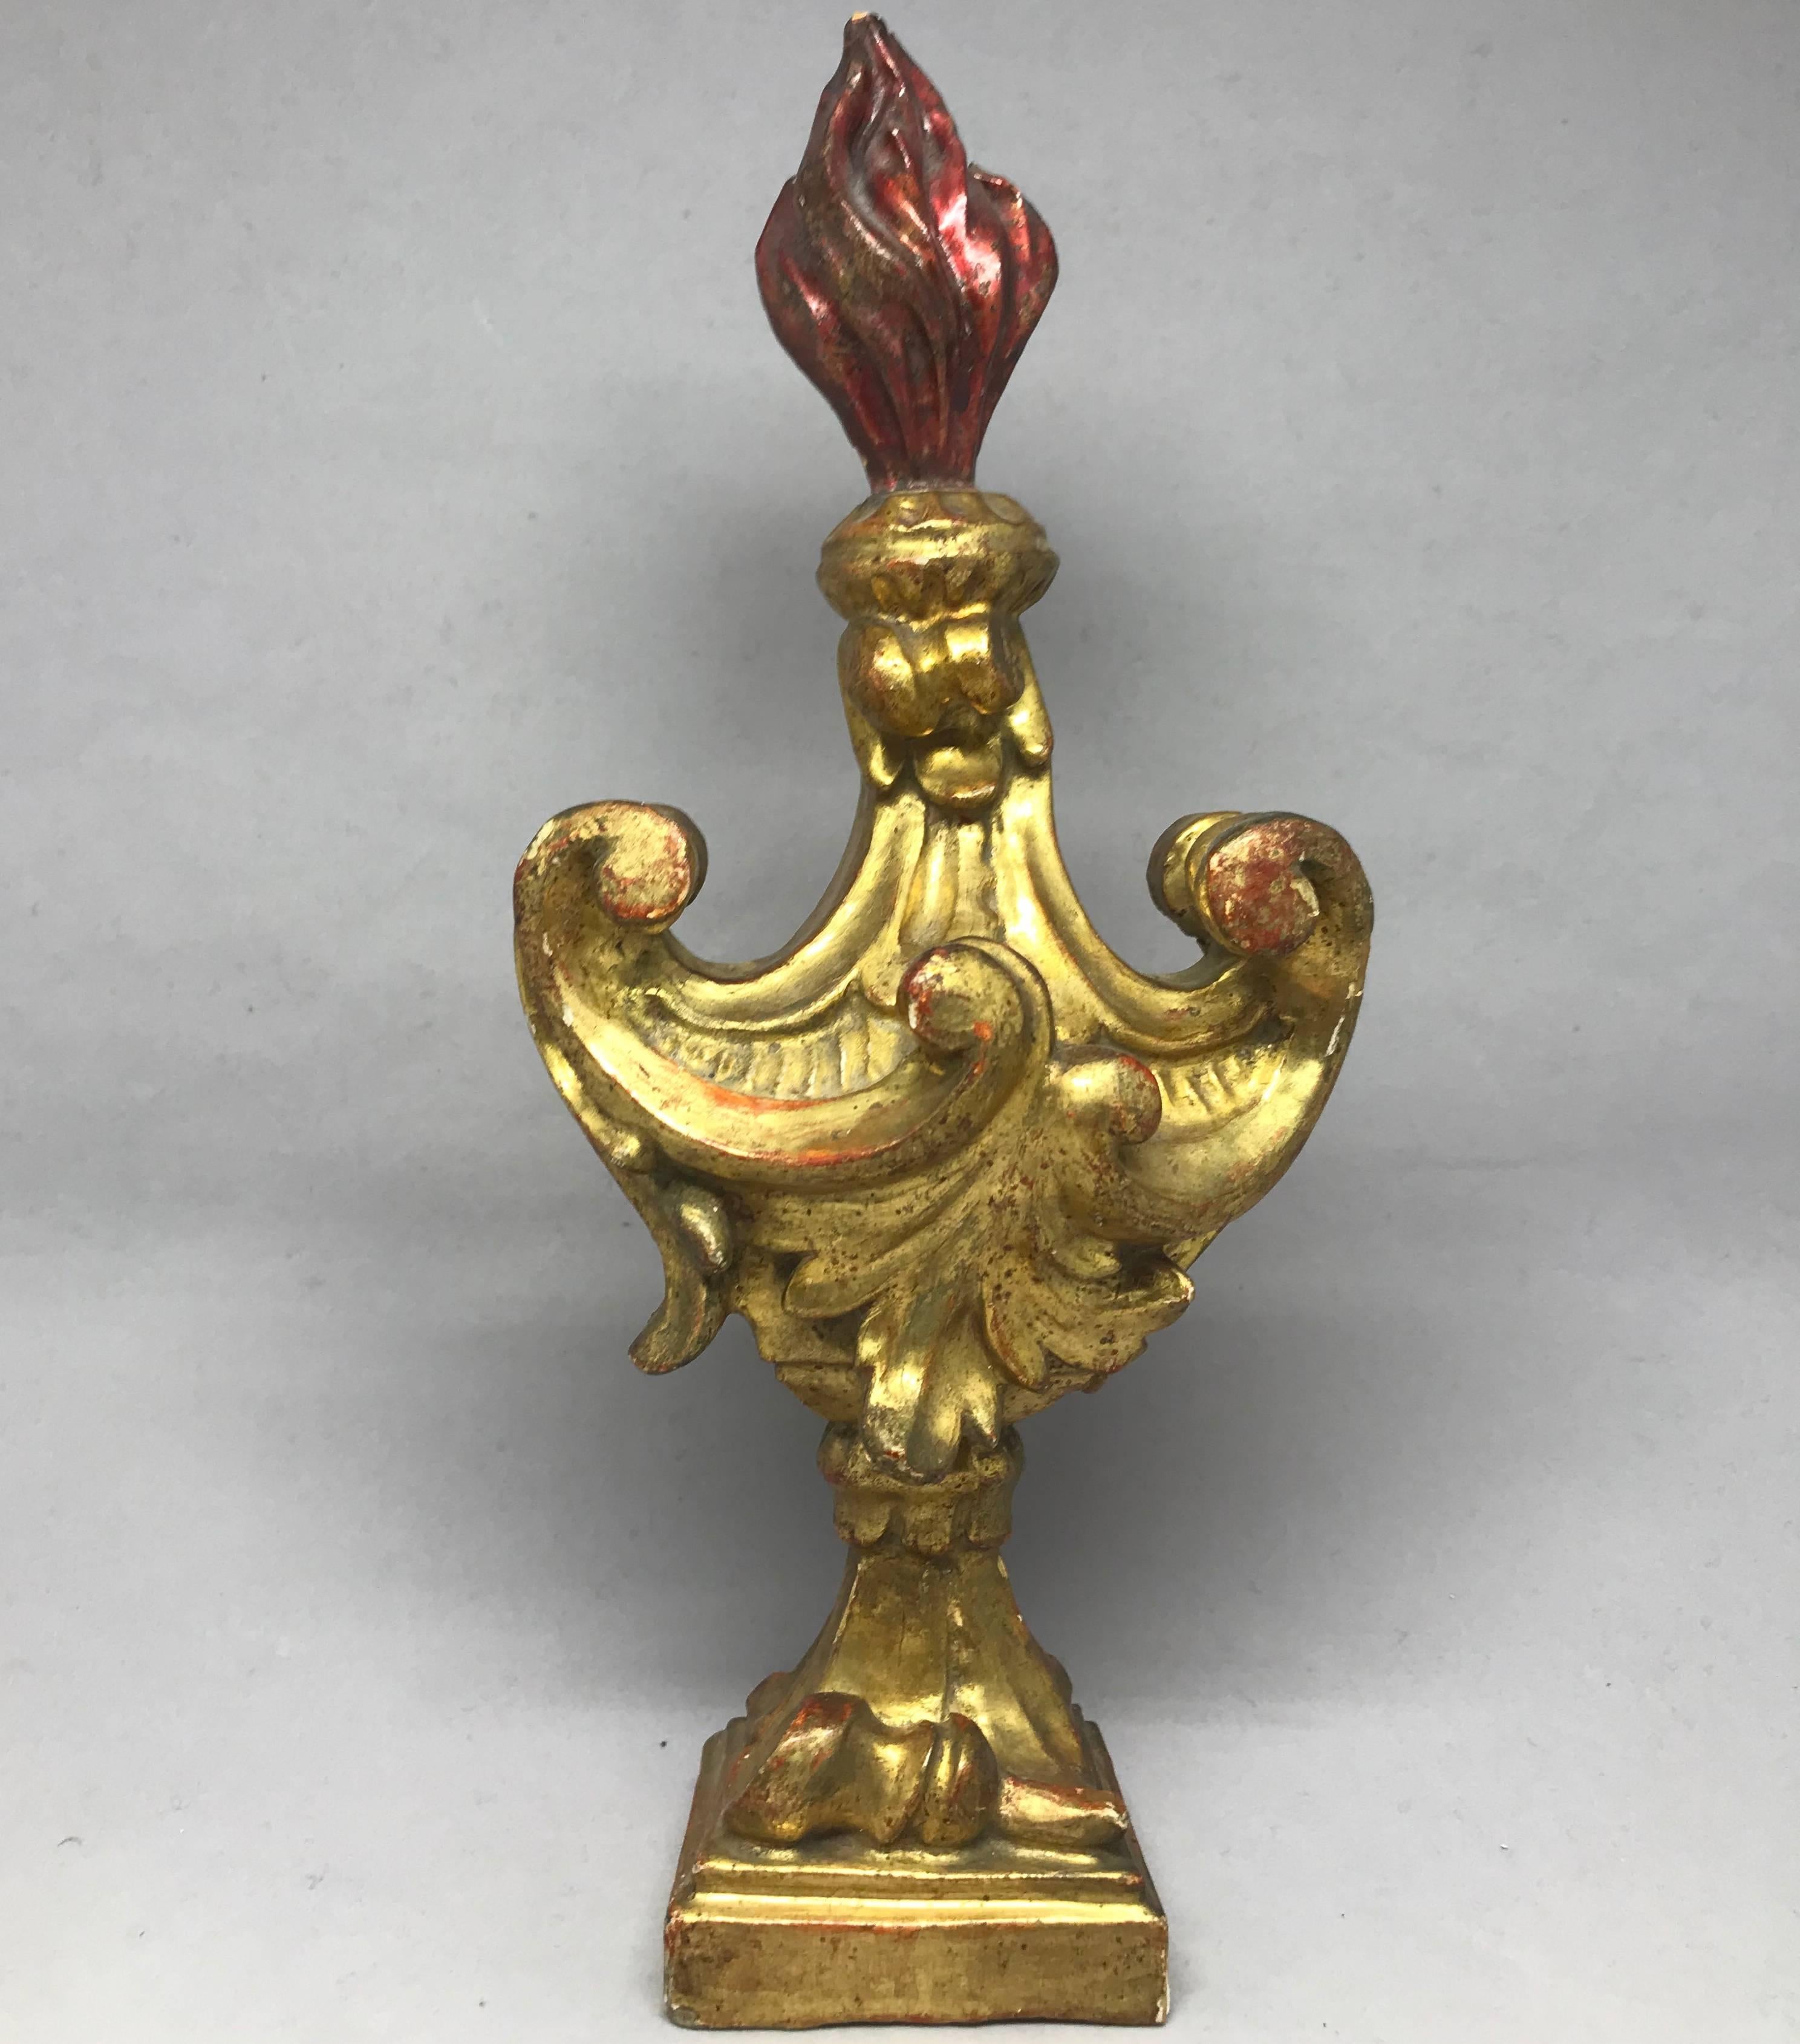 Antique carved giltwood and painted Rococo-style flame decoration on pedestal, Italy, 19th century. 
Dimension: 10.5